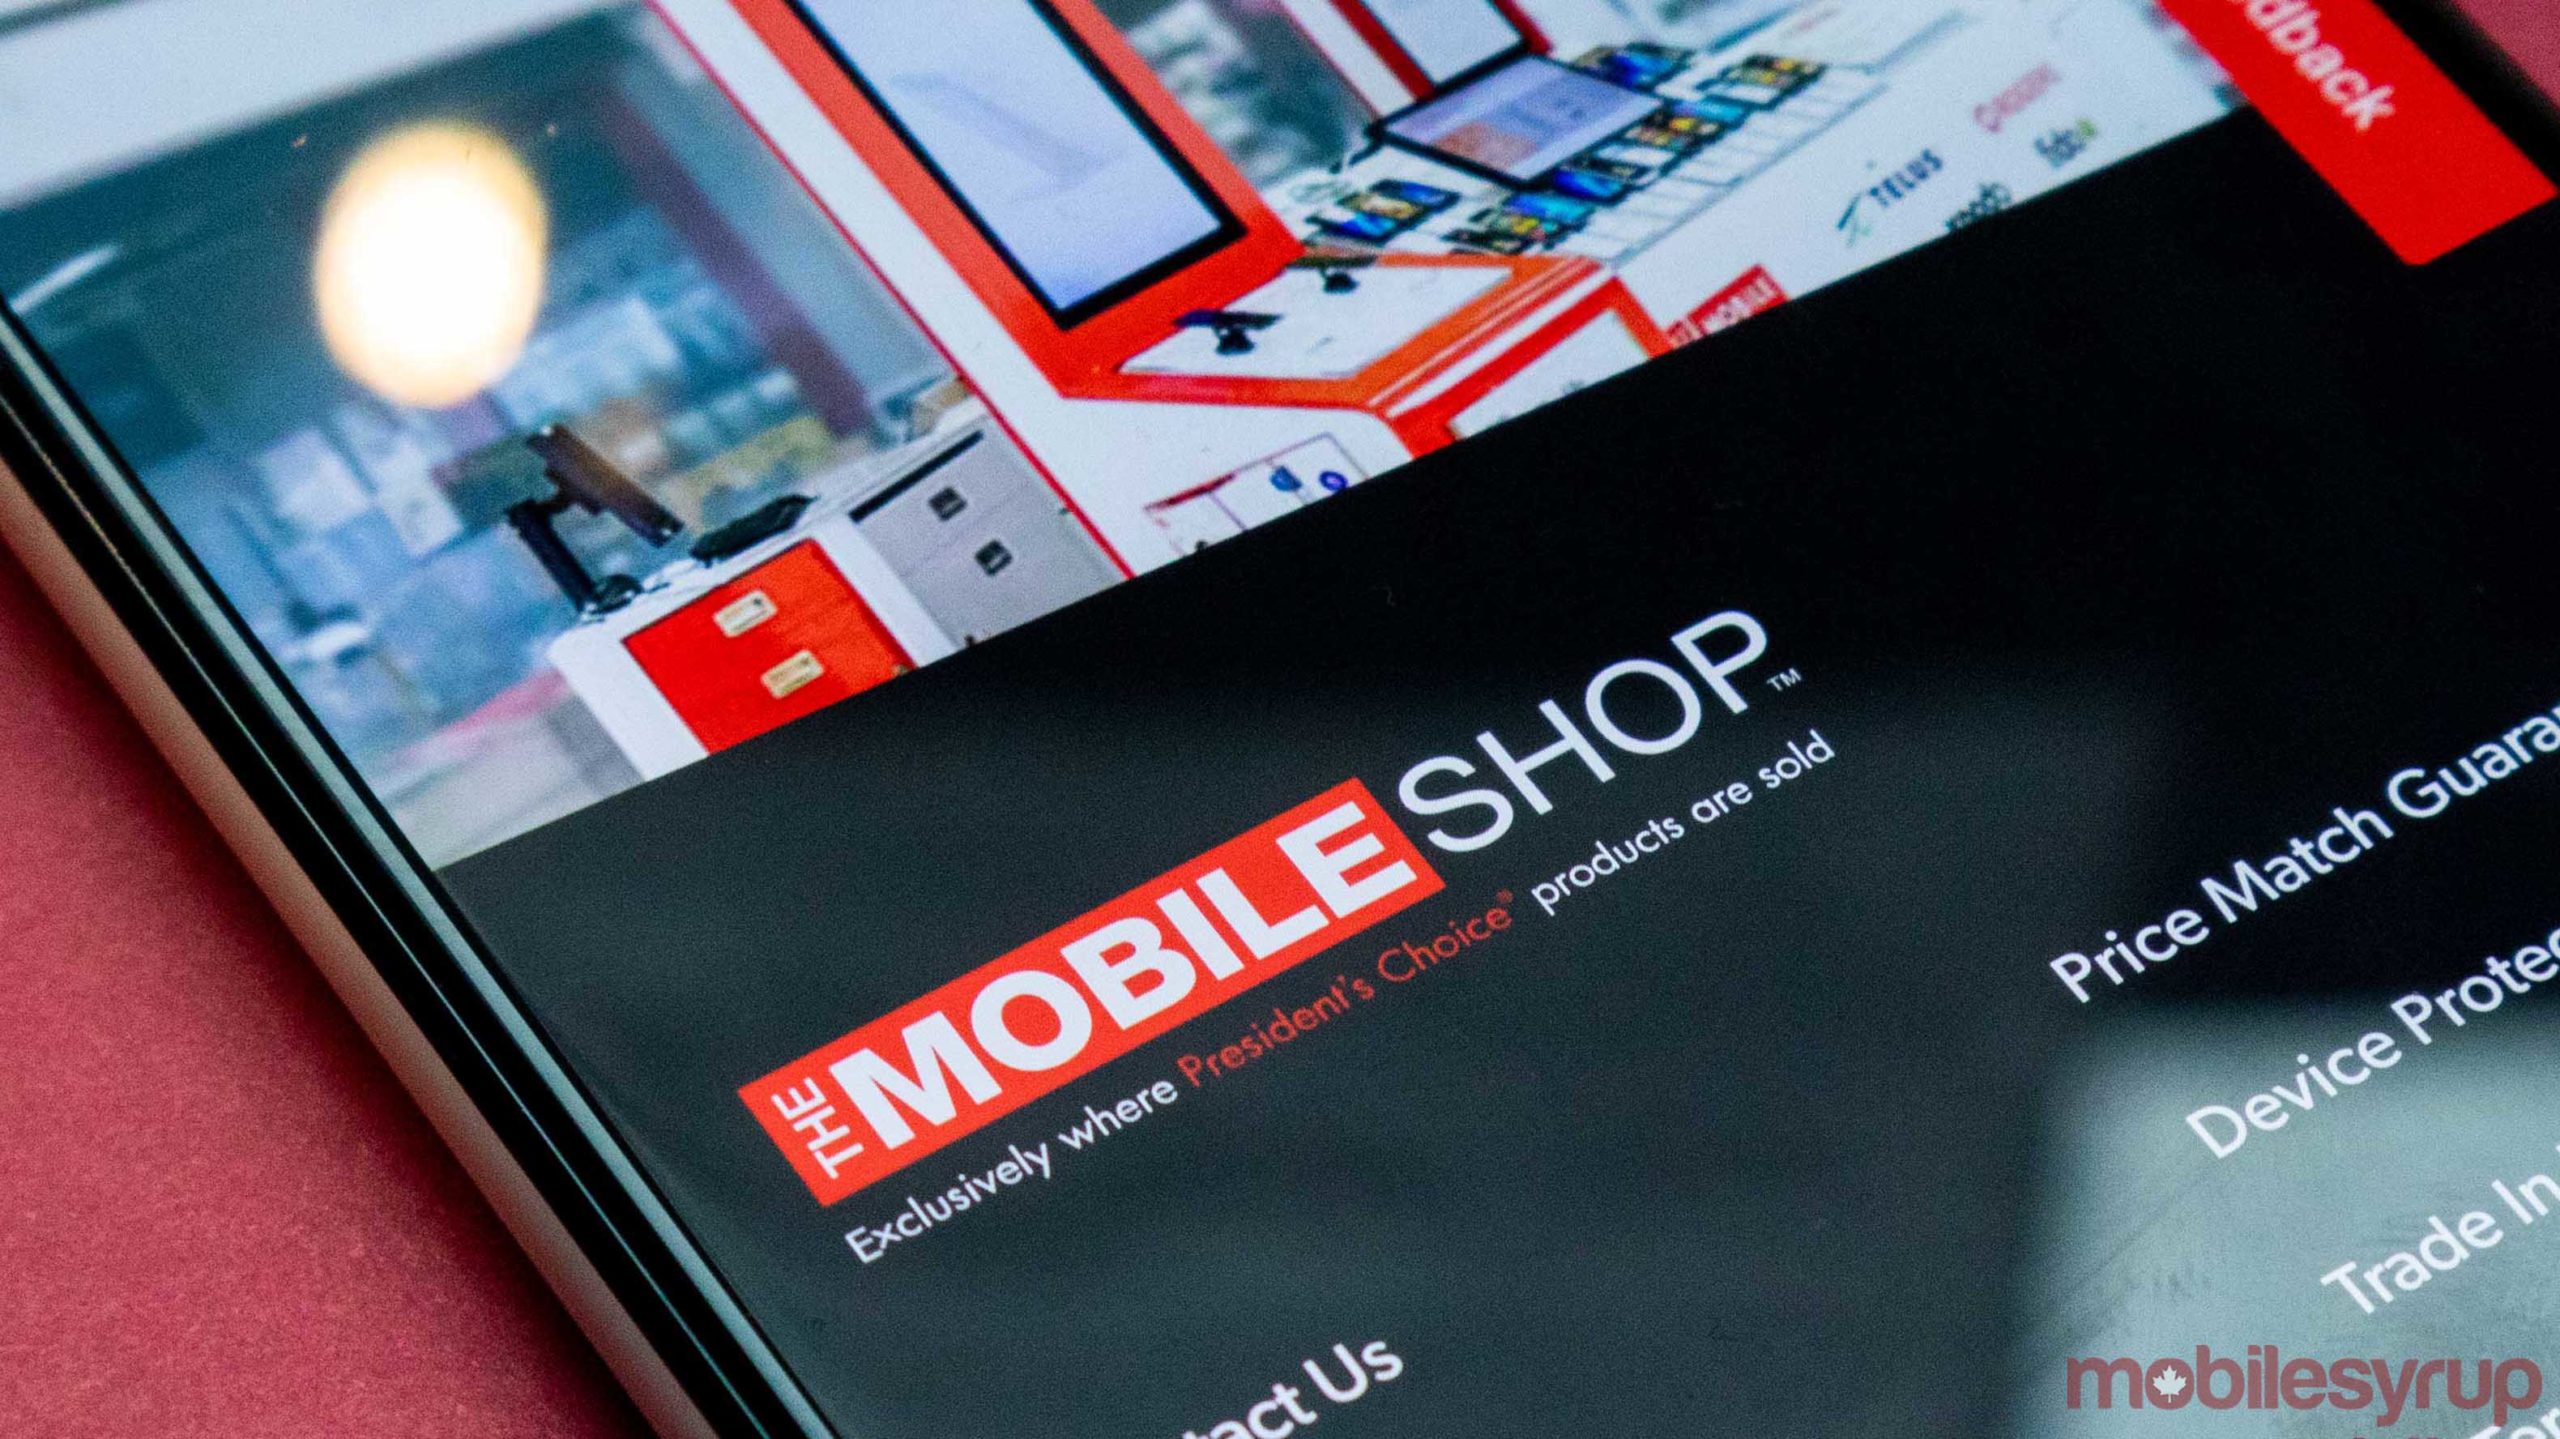 The Mobile Shop